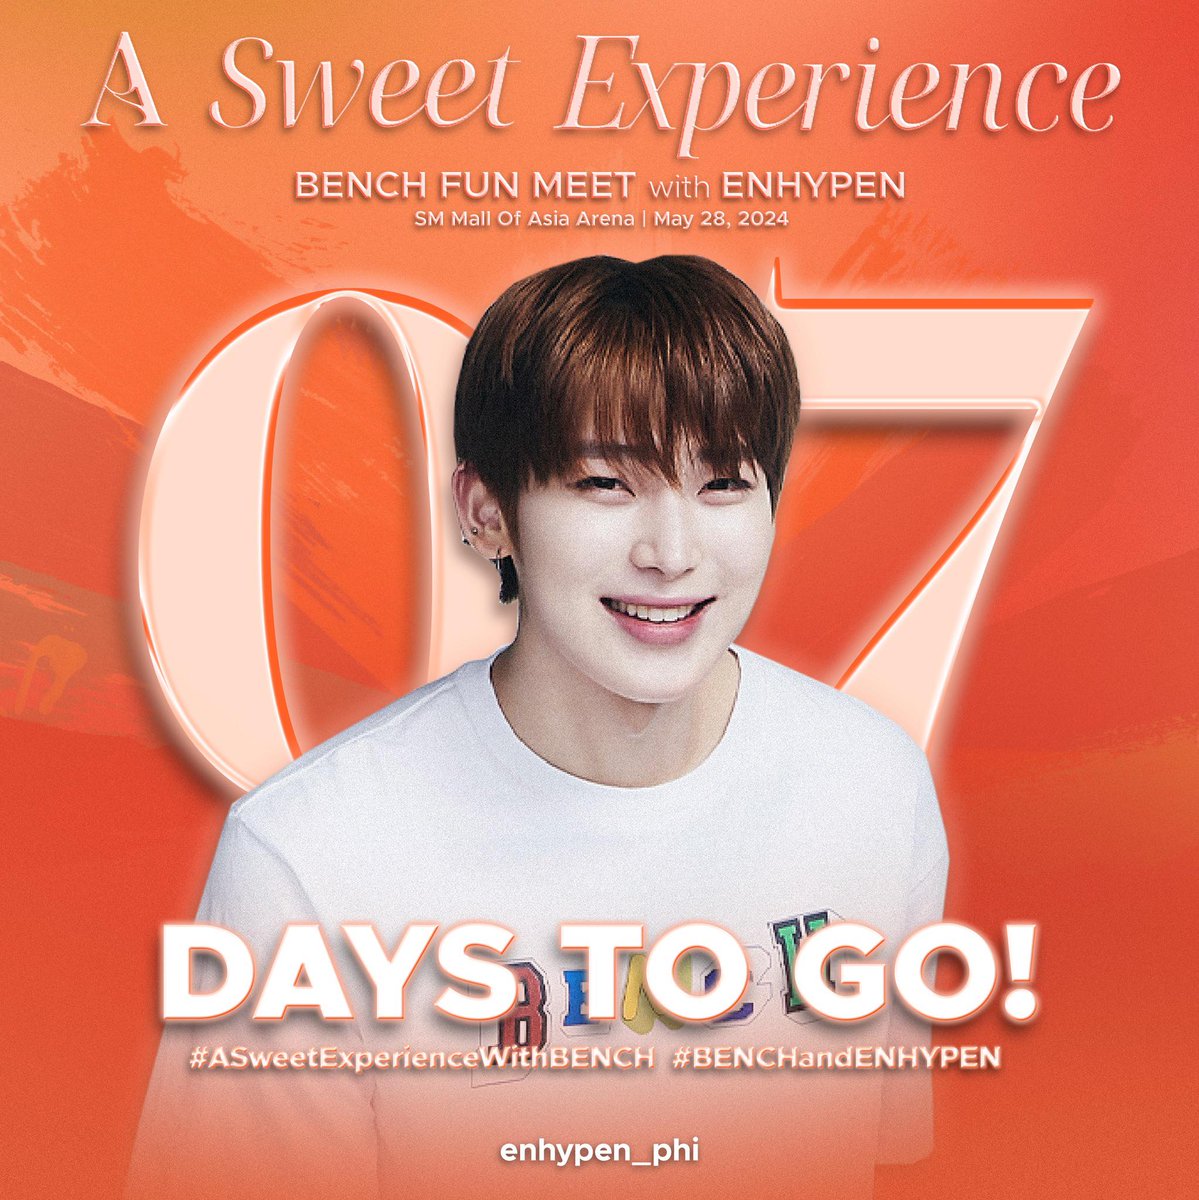 HANDA NA BA KAYONG MAKITA SILA ULIT?! 🫣

Just ONE WEEK away until we experience the sweetest moments with our sevEN at SM Mall Of Asia Arena! Get ready to make more unforgettable memories! ✨

#ASweetExperienceWithBENCH  
#BENCHandENHYPEN #ENHYPEN  
@ENHYPEN_members @ENHYPEN